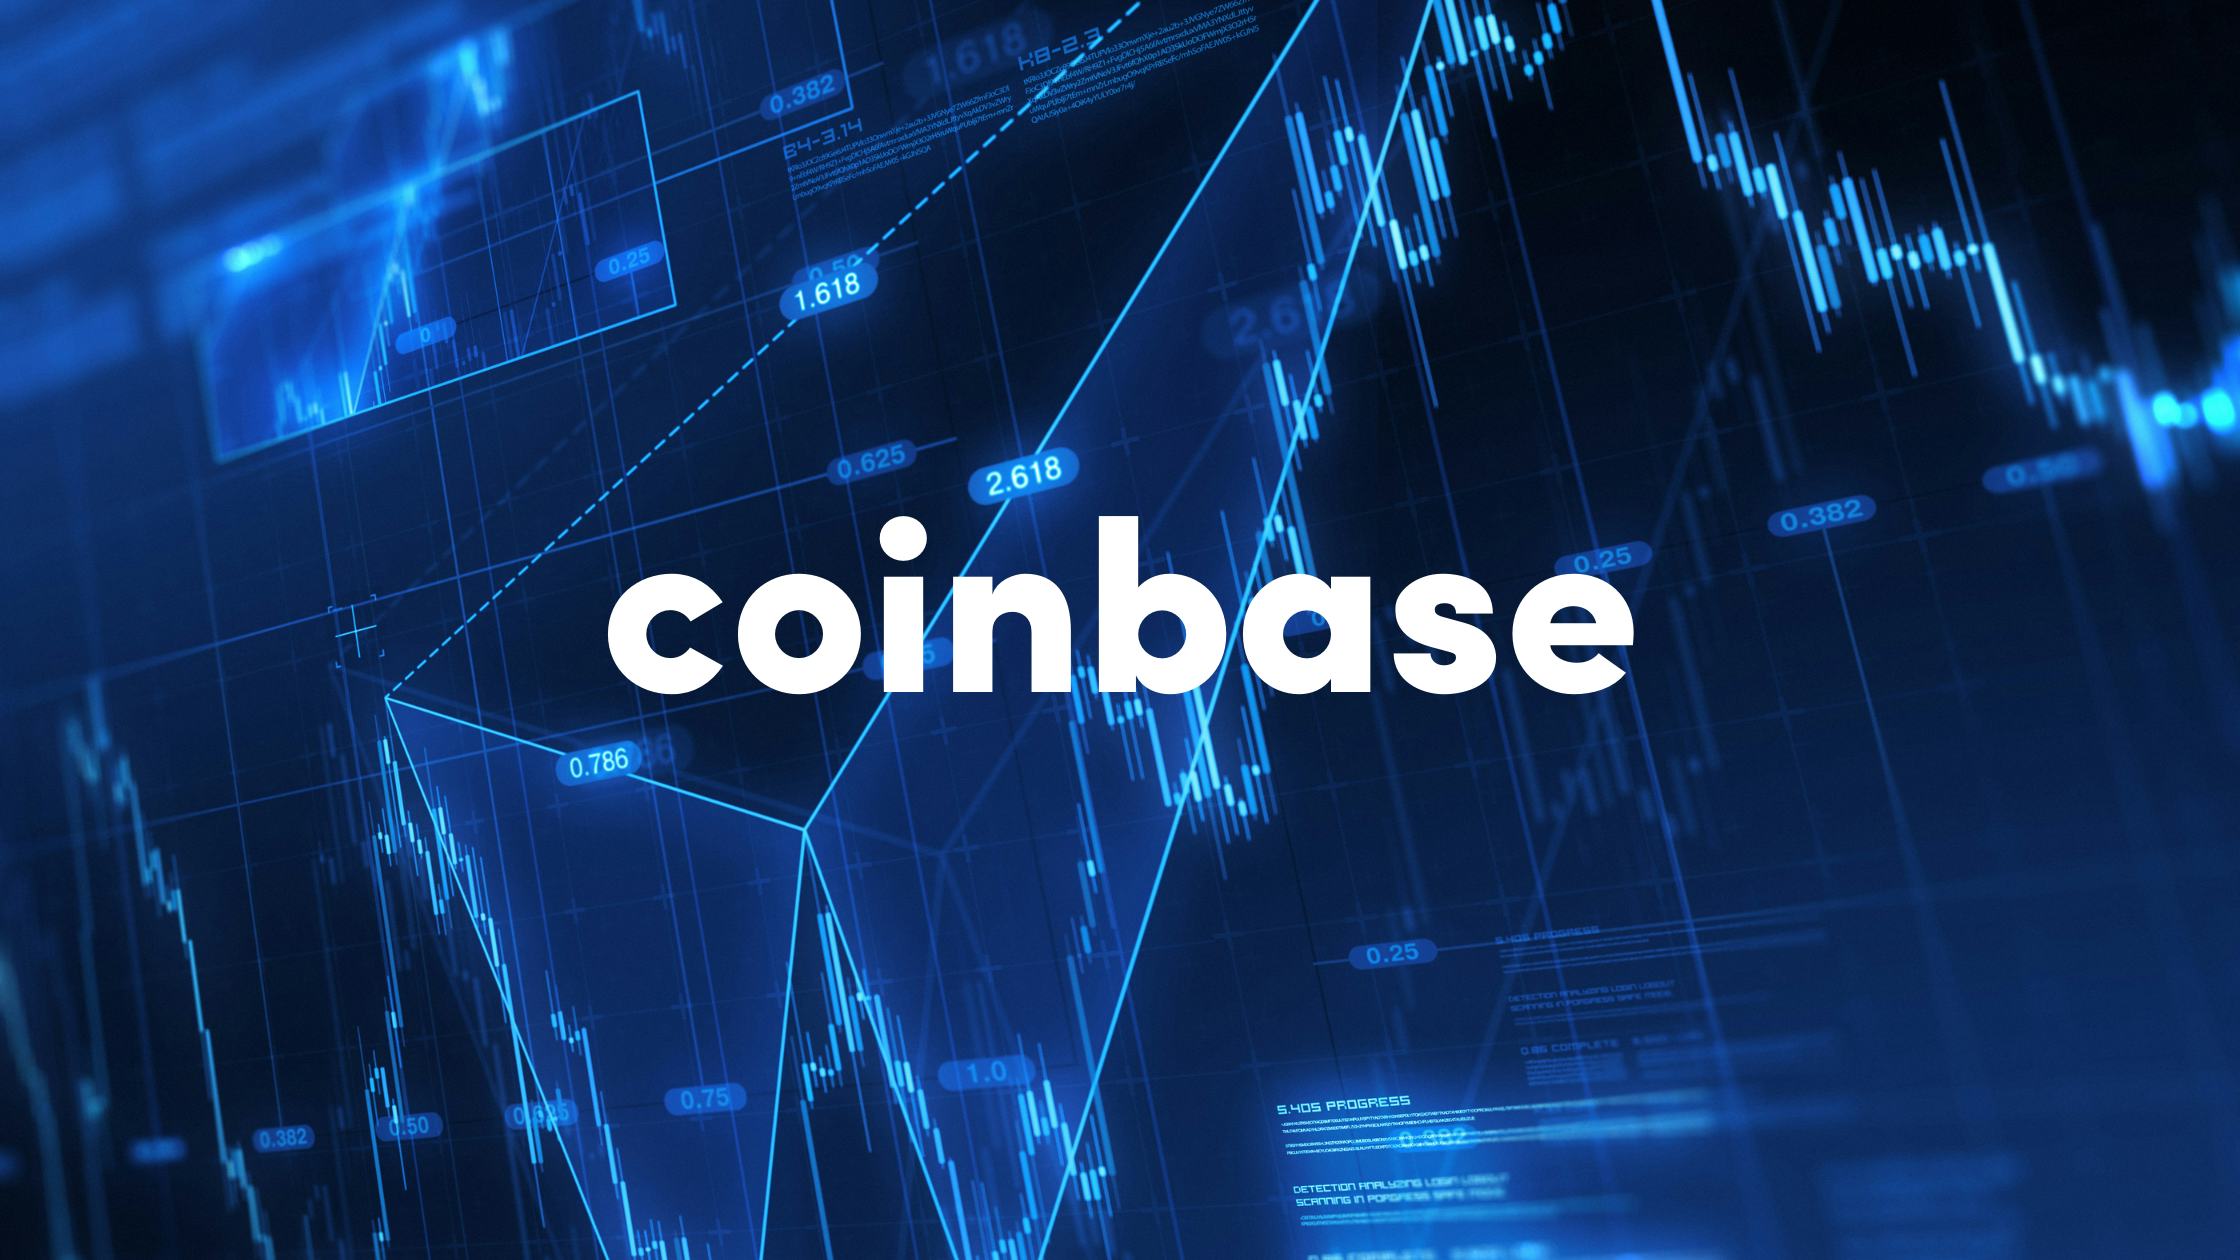 Coinbase Shares Plunge After Company Misses Q1 Revenue, Posts $430M Loss